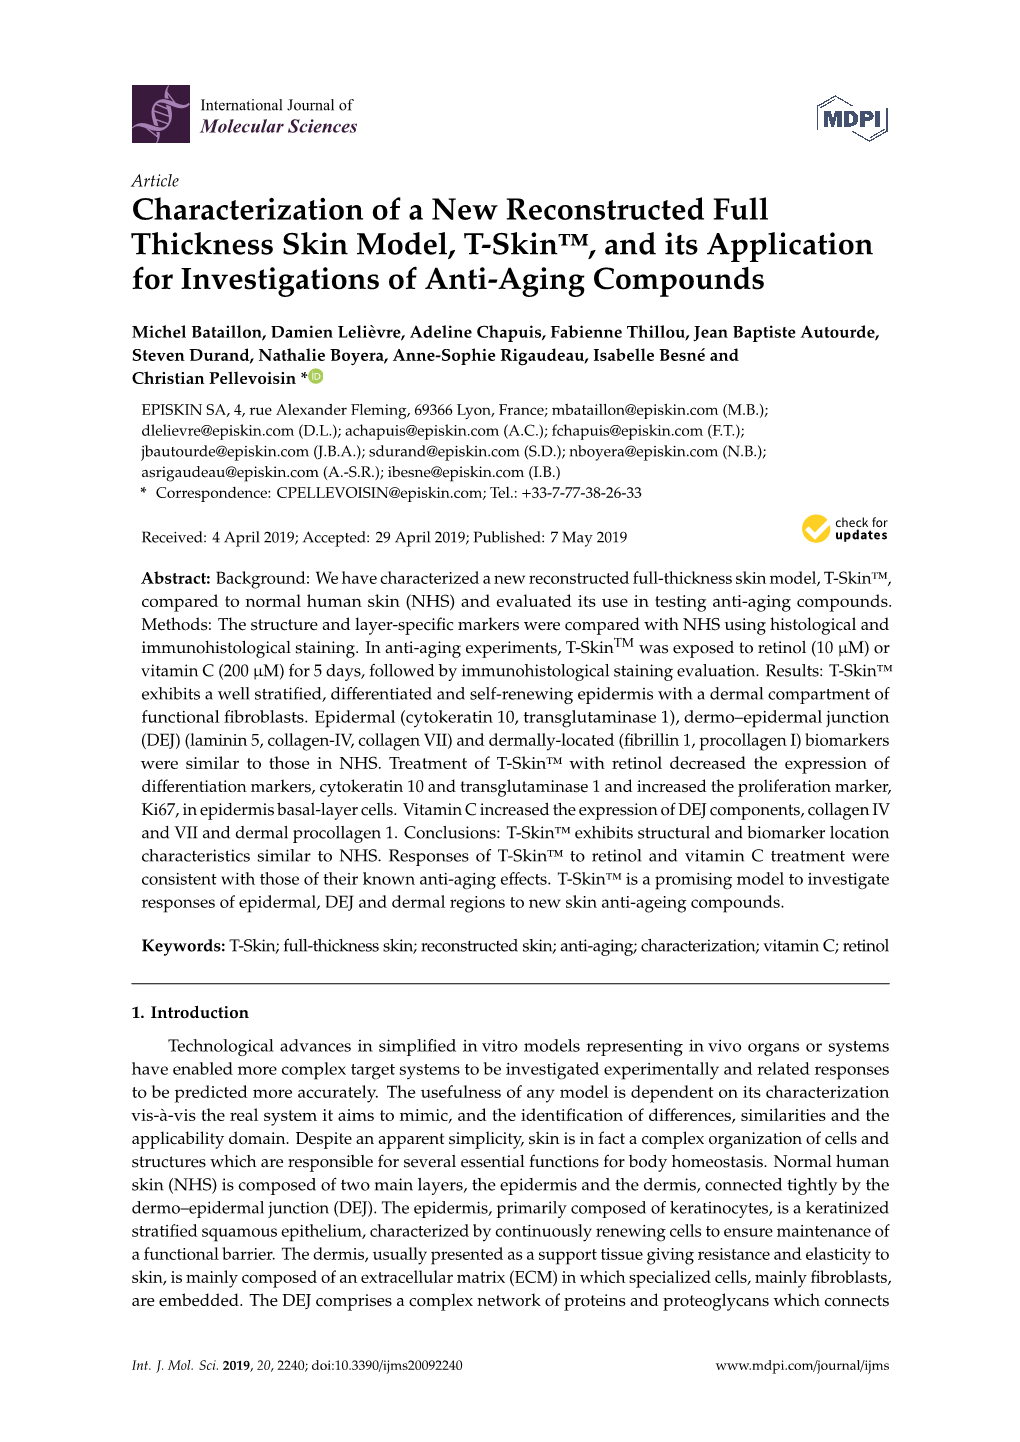 Characterization of a New Reconstructed Full Thickness Skin Model, T-Skin™, and Its Application for Investigations of Anti-Aging Compounds